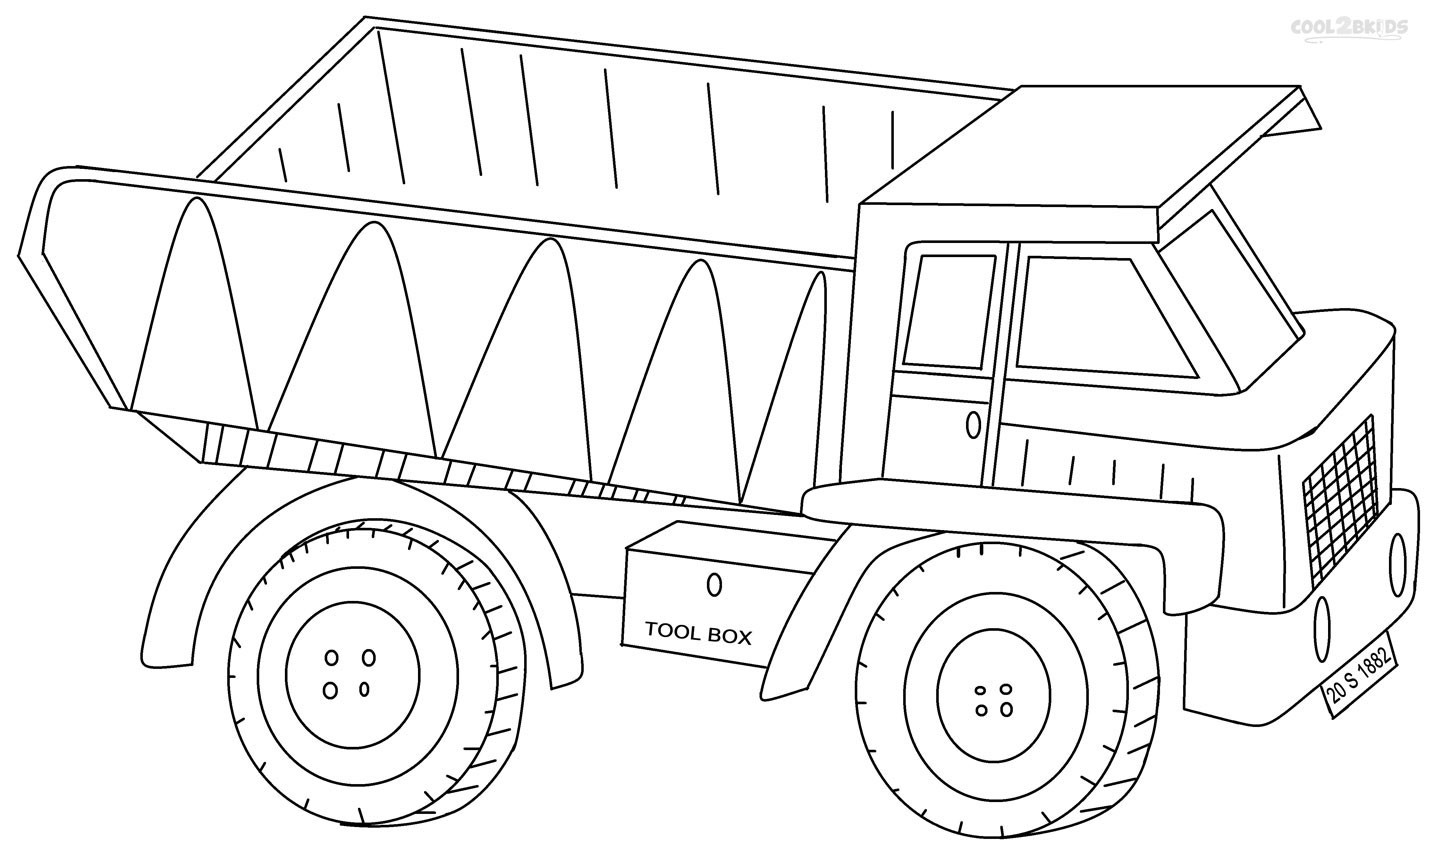 Truck Coloring Pages For Kids
 Printable Dump Truck Coloring Pages For Kids